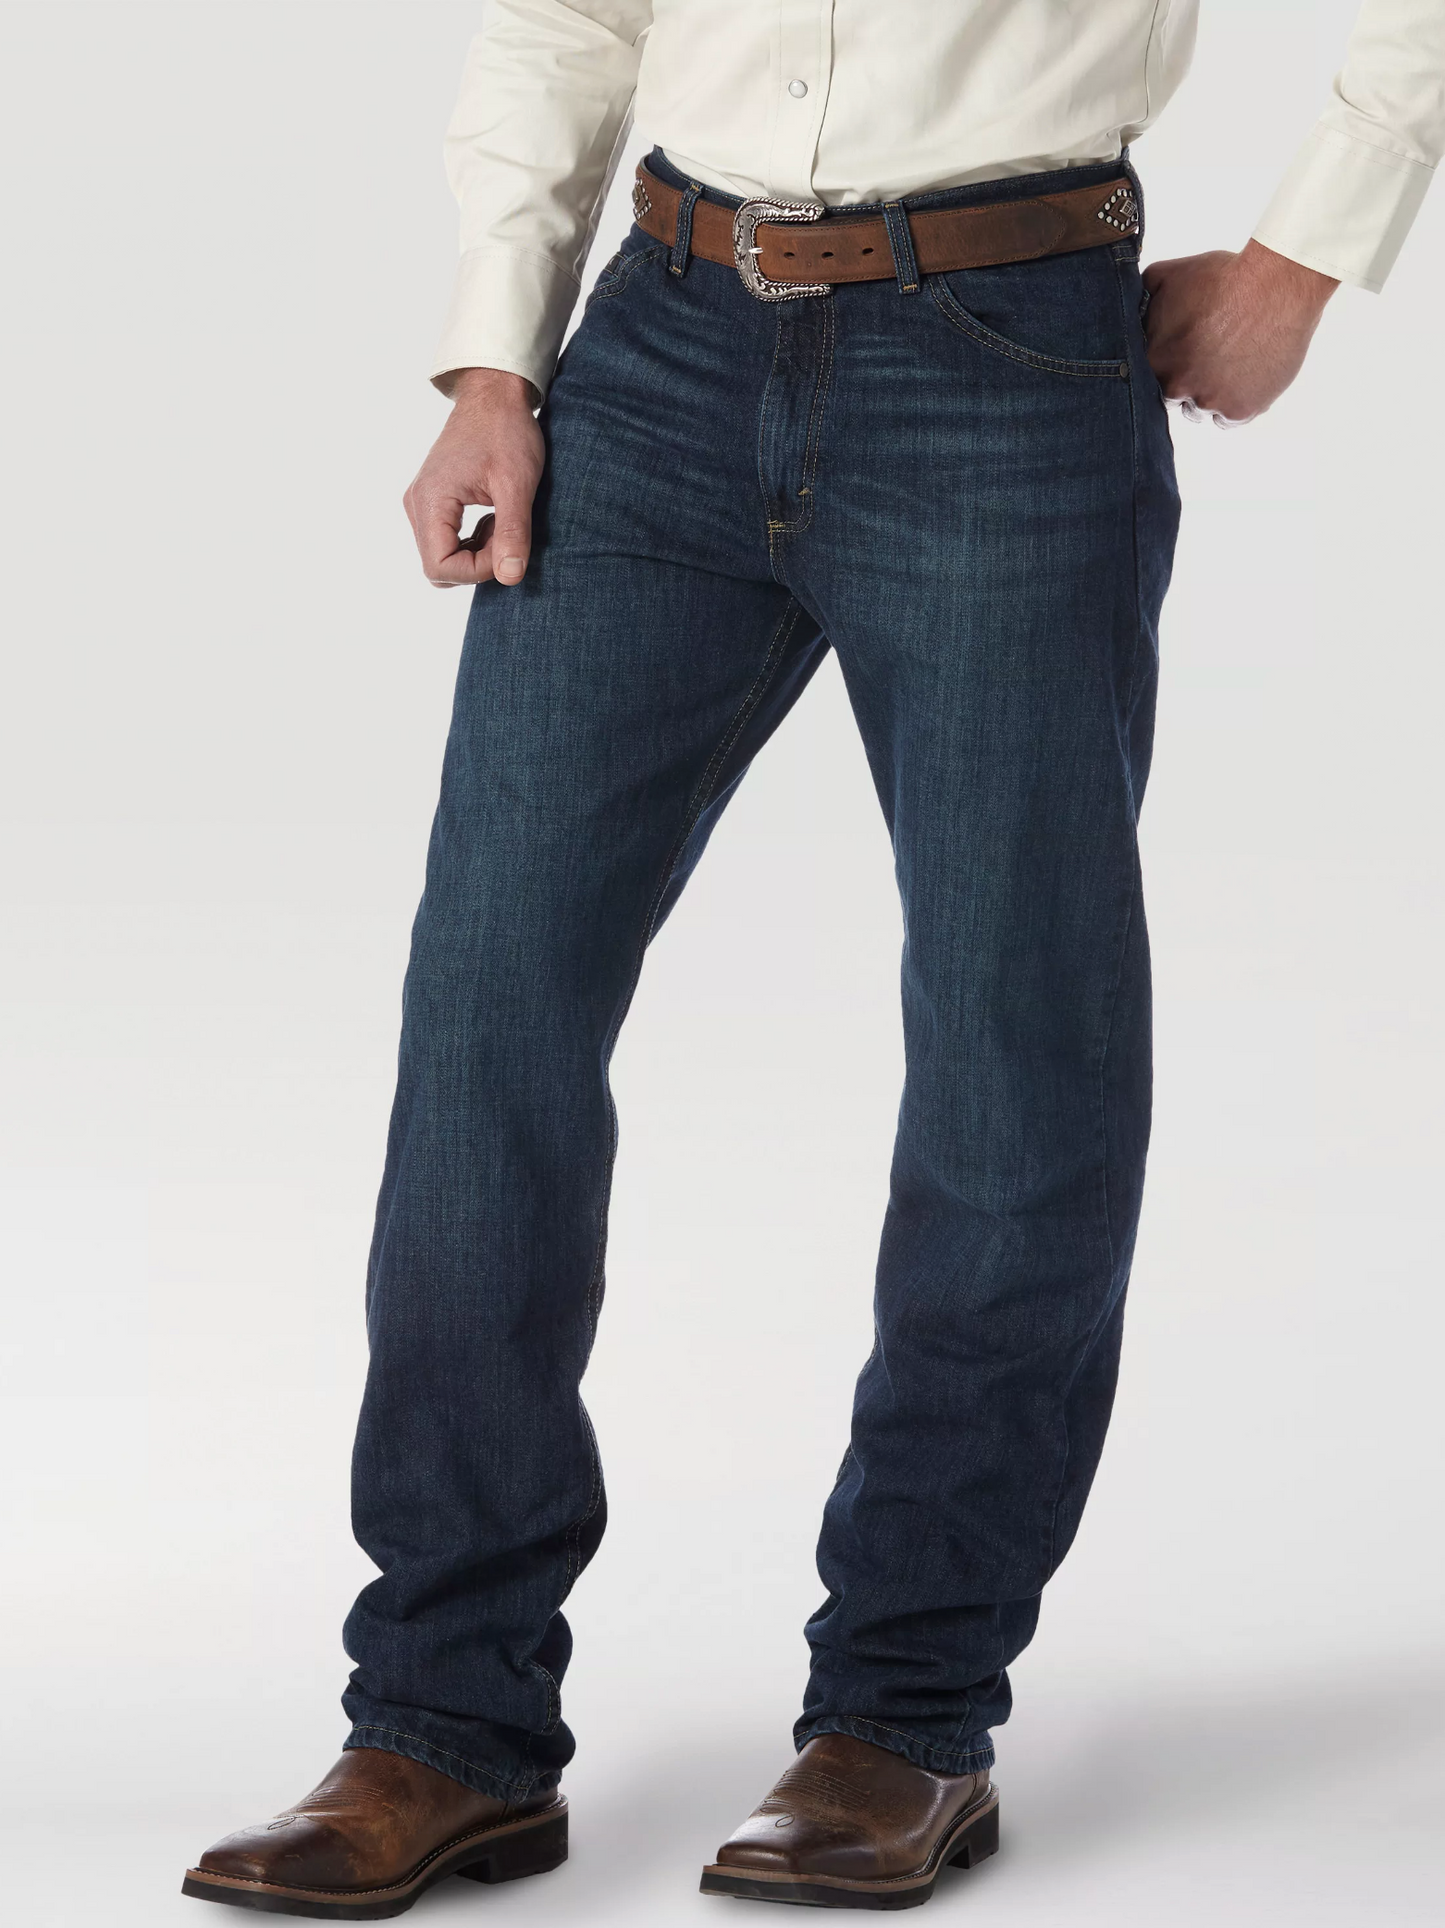 WRANGLER 20X 01 COMPETITION JEAN IN DEEPBLUE